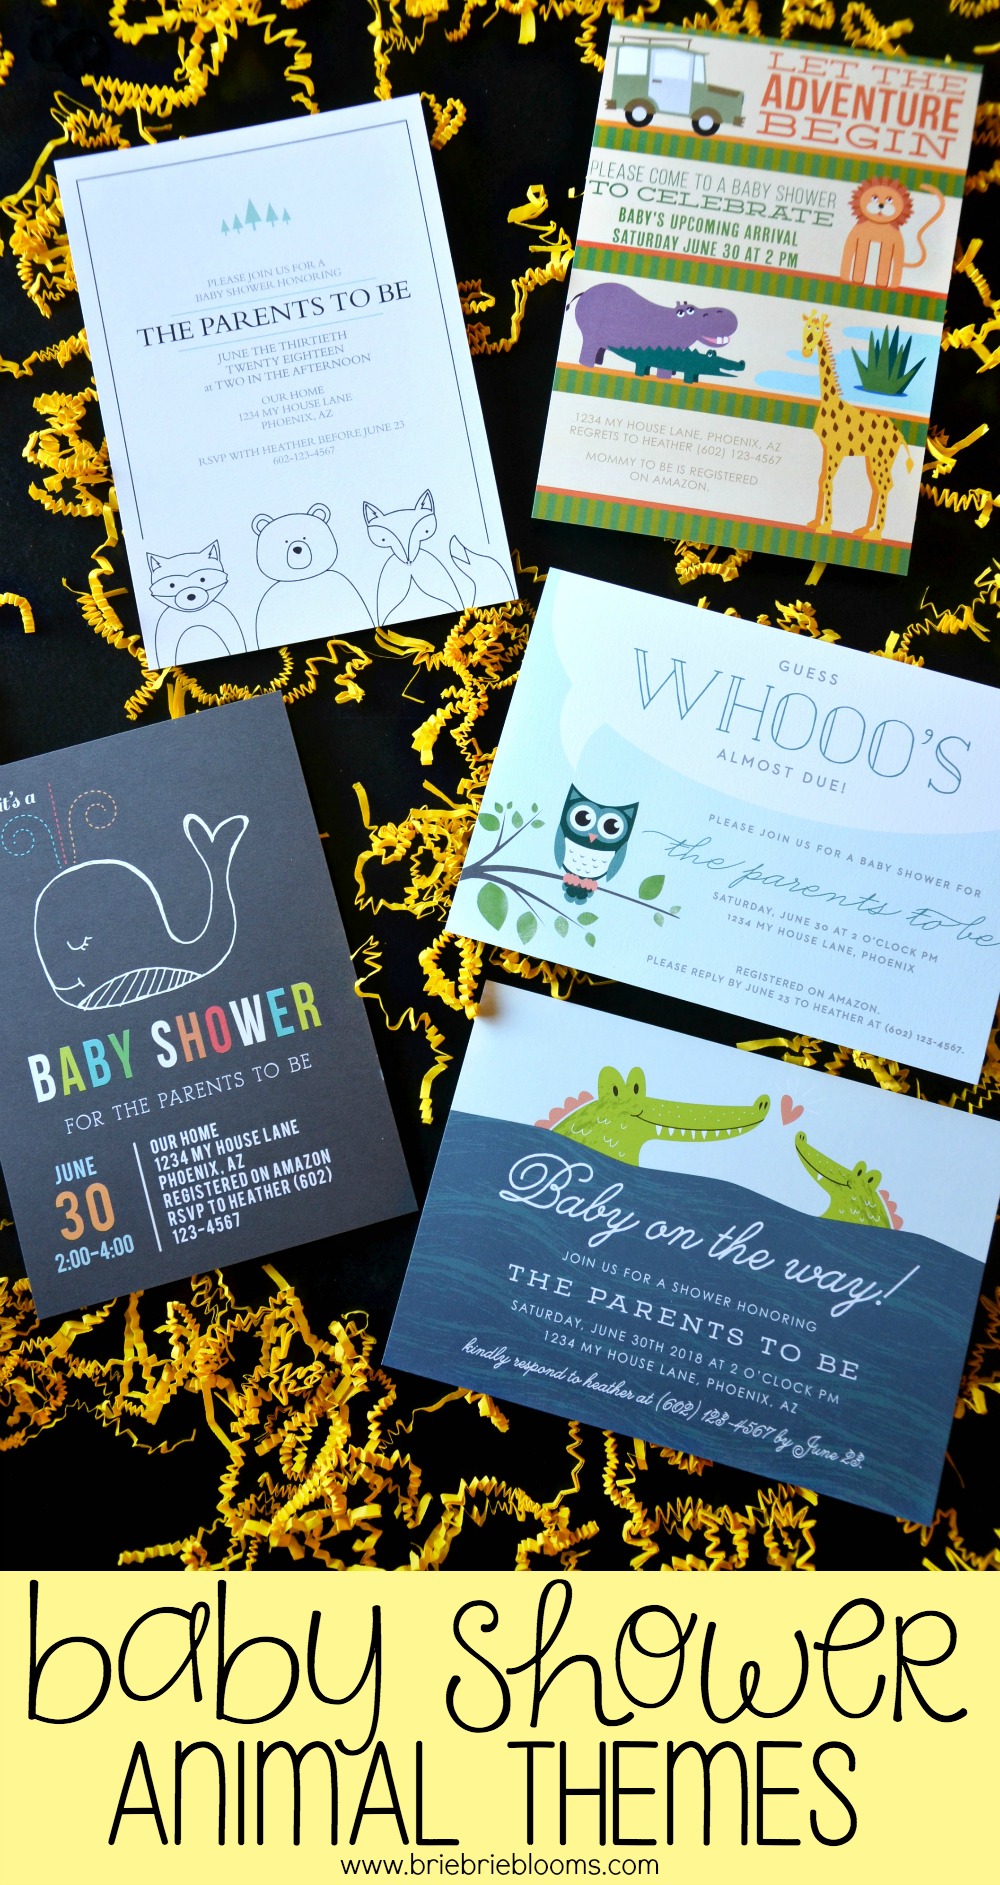 Baby shower animal themes don't have to be just pink elephants and yellow ducks. Make it fun with these ideas!